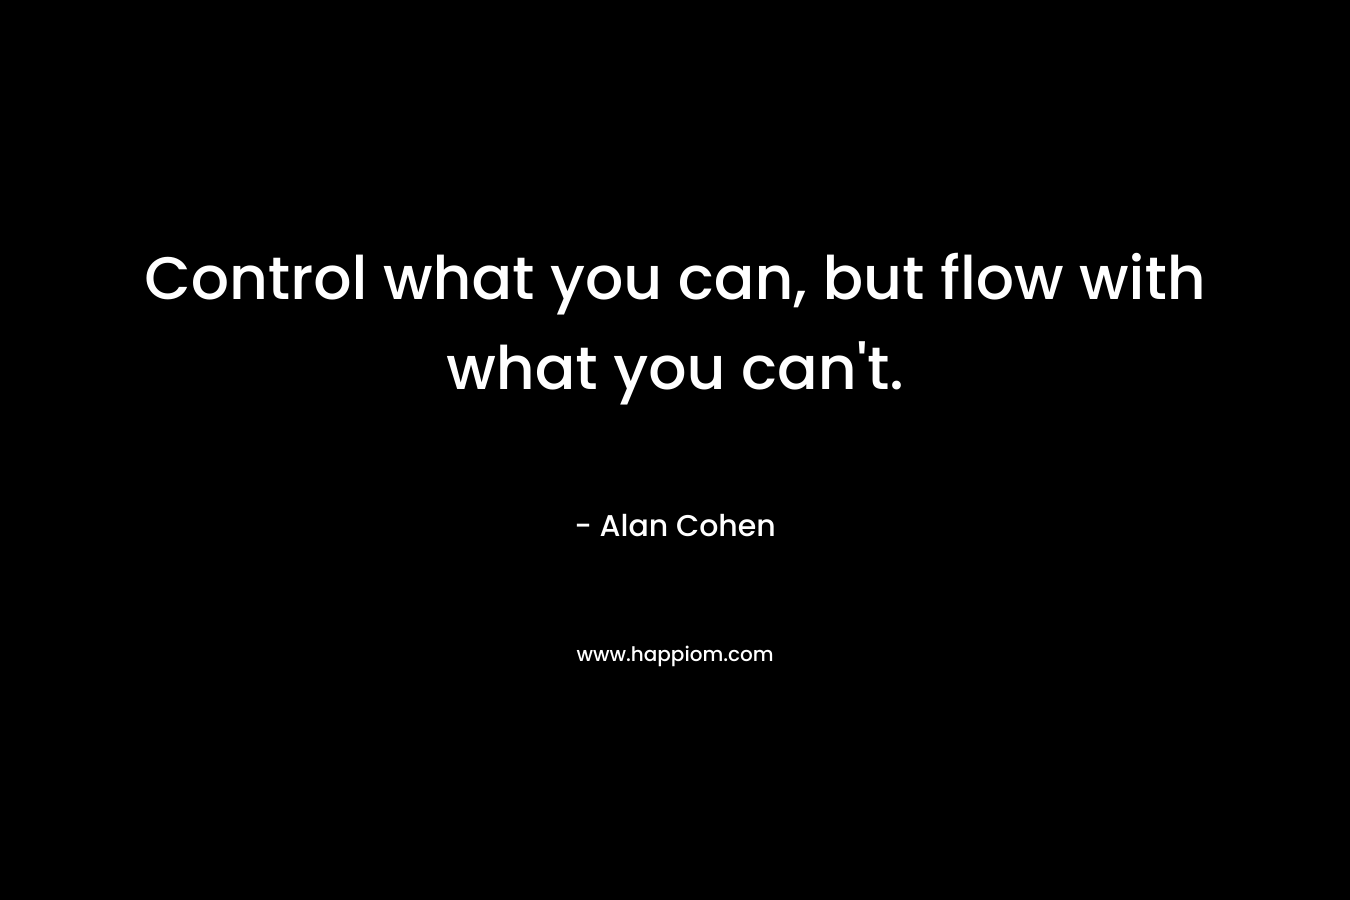 Control what you can, but flow with what you can't.